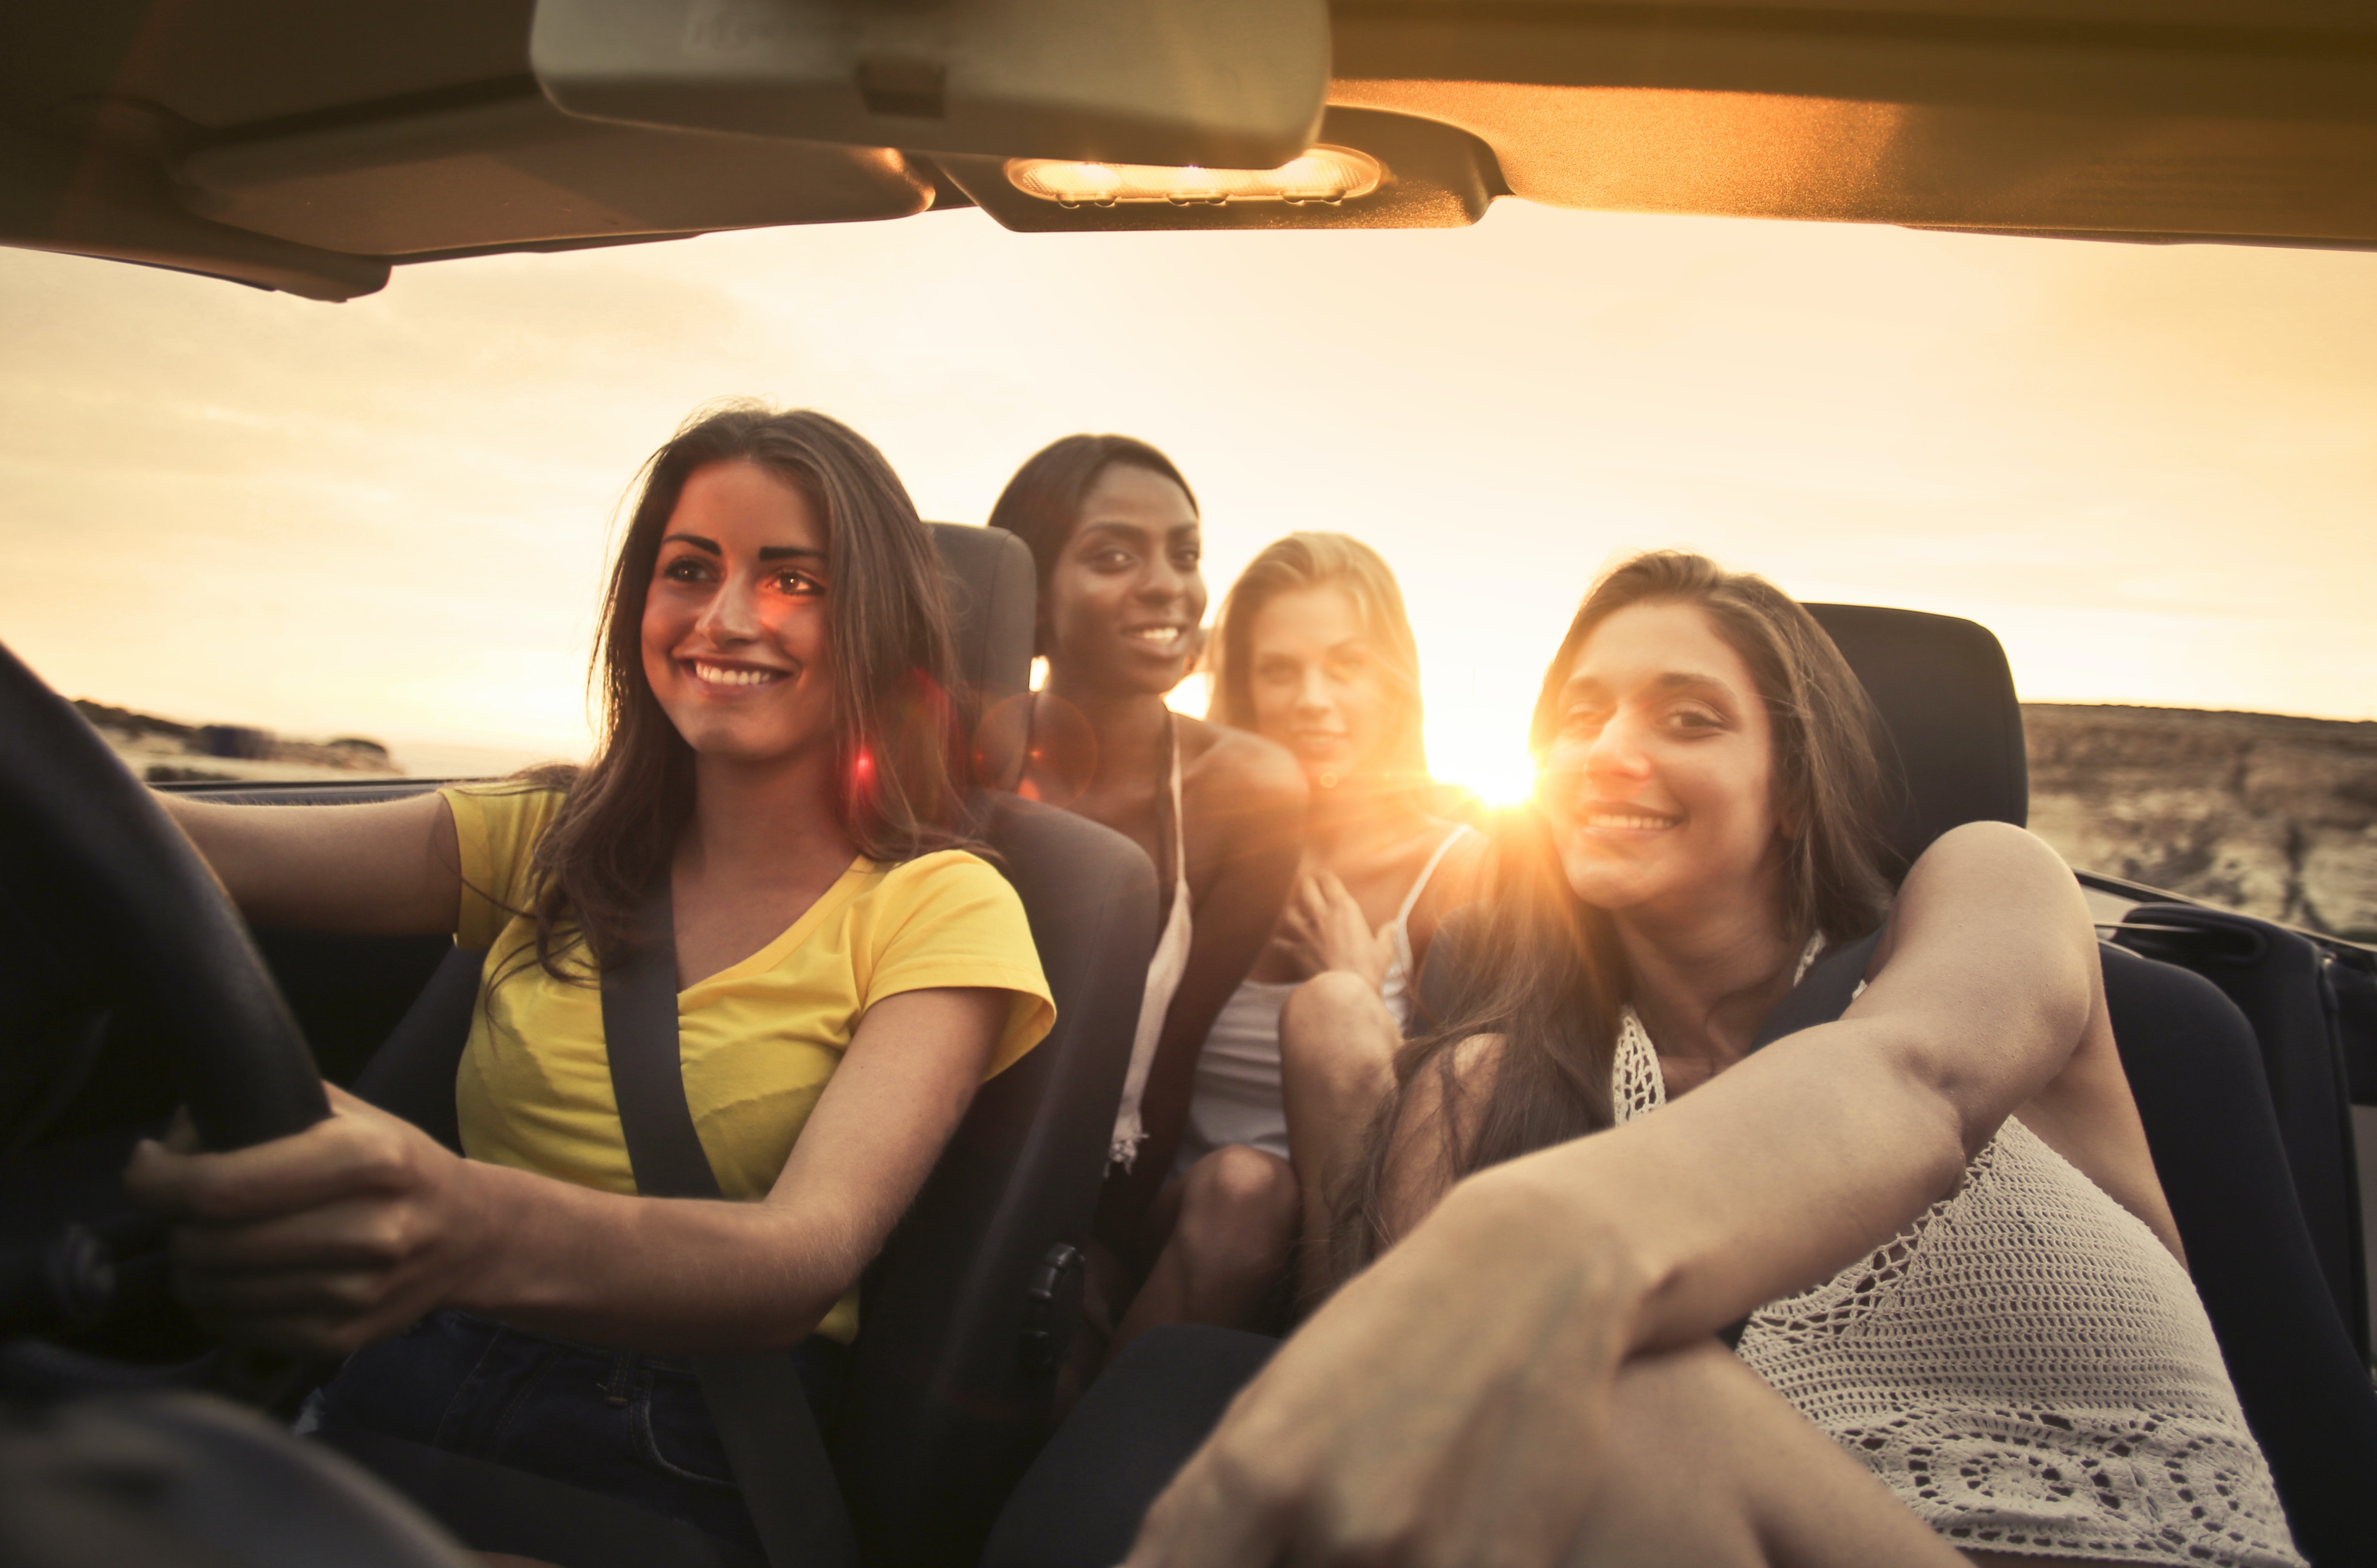 A group of 4 girlfriends driving at sunset smiling together.